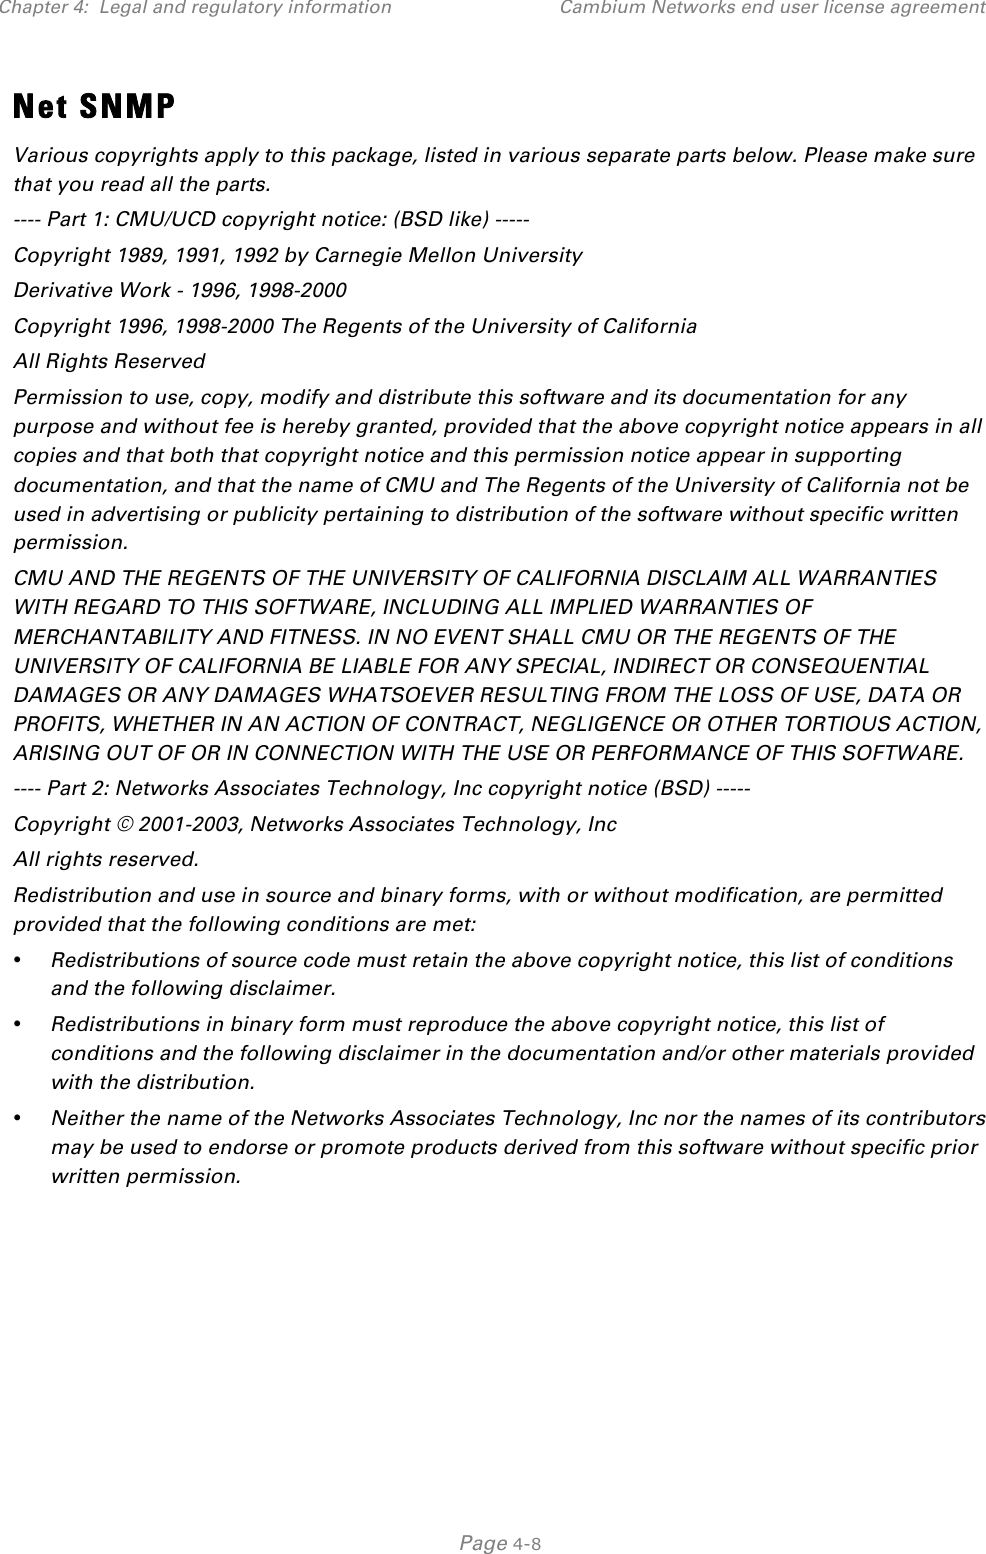 Chapter 4:  Legal and regulatory information Cambium Networks end user license agreement   Page 4-8 Net SNMP Various copyrights apply to this package, listed in various separate parts below. Please make sure that you read all the parts. ---- Part 1: CMU/UCD copyright notice: (BSD like) ----- Copyright 1989, 1991, 1992 by Carnegie Mellon University Derivative Work - 1996, 1998-2000 Copyright 1996, 1998-2000 The Regents of the University of California All Rights Reserved Permission to use, copy, modify and distribute this software and its documentation for any purpose and without fee is hereby granted, provided that the above copyright notice appears in all copies and that both that copyright notice and this permission notice appear in supporting documentation, and that the name of CMU and The Regents of the University of California not be used in advertising or publicity pertaining to distribution of the software without specific written permission. CMU AND THE REGENTS OF THE UNIVERSITY OF CALIFORNIA DISCLAIM ALL WARRANTIES WITH REGARD TO THIS SOFTWARE, INCLUDING ALL IMPLIED WARRANTIES OF MERCHANTABILITY AND FITNESS. IN NO EVENT SHALL CMU OR THE REGENTS OF THE UNIVERSITY OF CALIFORNIA BE LIABLE FOR ANY SPECIAL, INDIRECT OR CONSEQUENTIAL DAMAGES OR ANY DAMAGES WHATSOEVER RESULTING FROM THE LOSS OF USE, DATA OR PROFITS, WHETHER IN AN ACTION OF CONTRACT, NEGLIGENCE OR OTHER TORTIOUS ACTION, ARISING OUT OF OR IN CONNECTION WITH THE USE OR PERFORMANCE OF THIS SOFTWARE. ---- Part 2: Networks Associates Technology, Inc copyright notice (BSD) ----- Copyright © 2001-2003, Networks Associates Technology, Inc All rights reserved. Redistribution and use in source and binary forms, with or without modification, are permitted provided that the following conditions are met: • Redistributions of source code must retain the above copyright notice, this list of conditions and the following disclaimer. • Redistributions in binary form must reproduce the above copyright notice, this list of conditions and the following disclaimer in the documentation and/or other materials provided with the distribution. • Neither the name of the Networks Associates Technology, Inc nor the names of its contributors may be used to endorse or promote products derived from this software without specific prior written permission. 